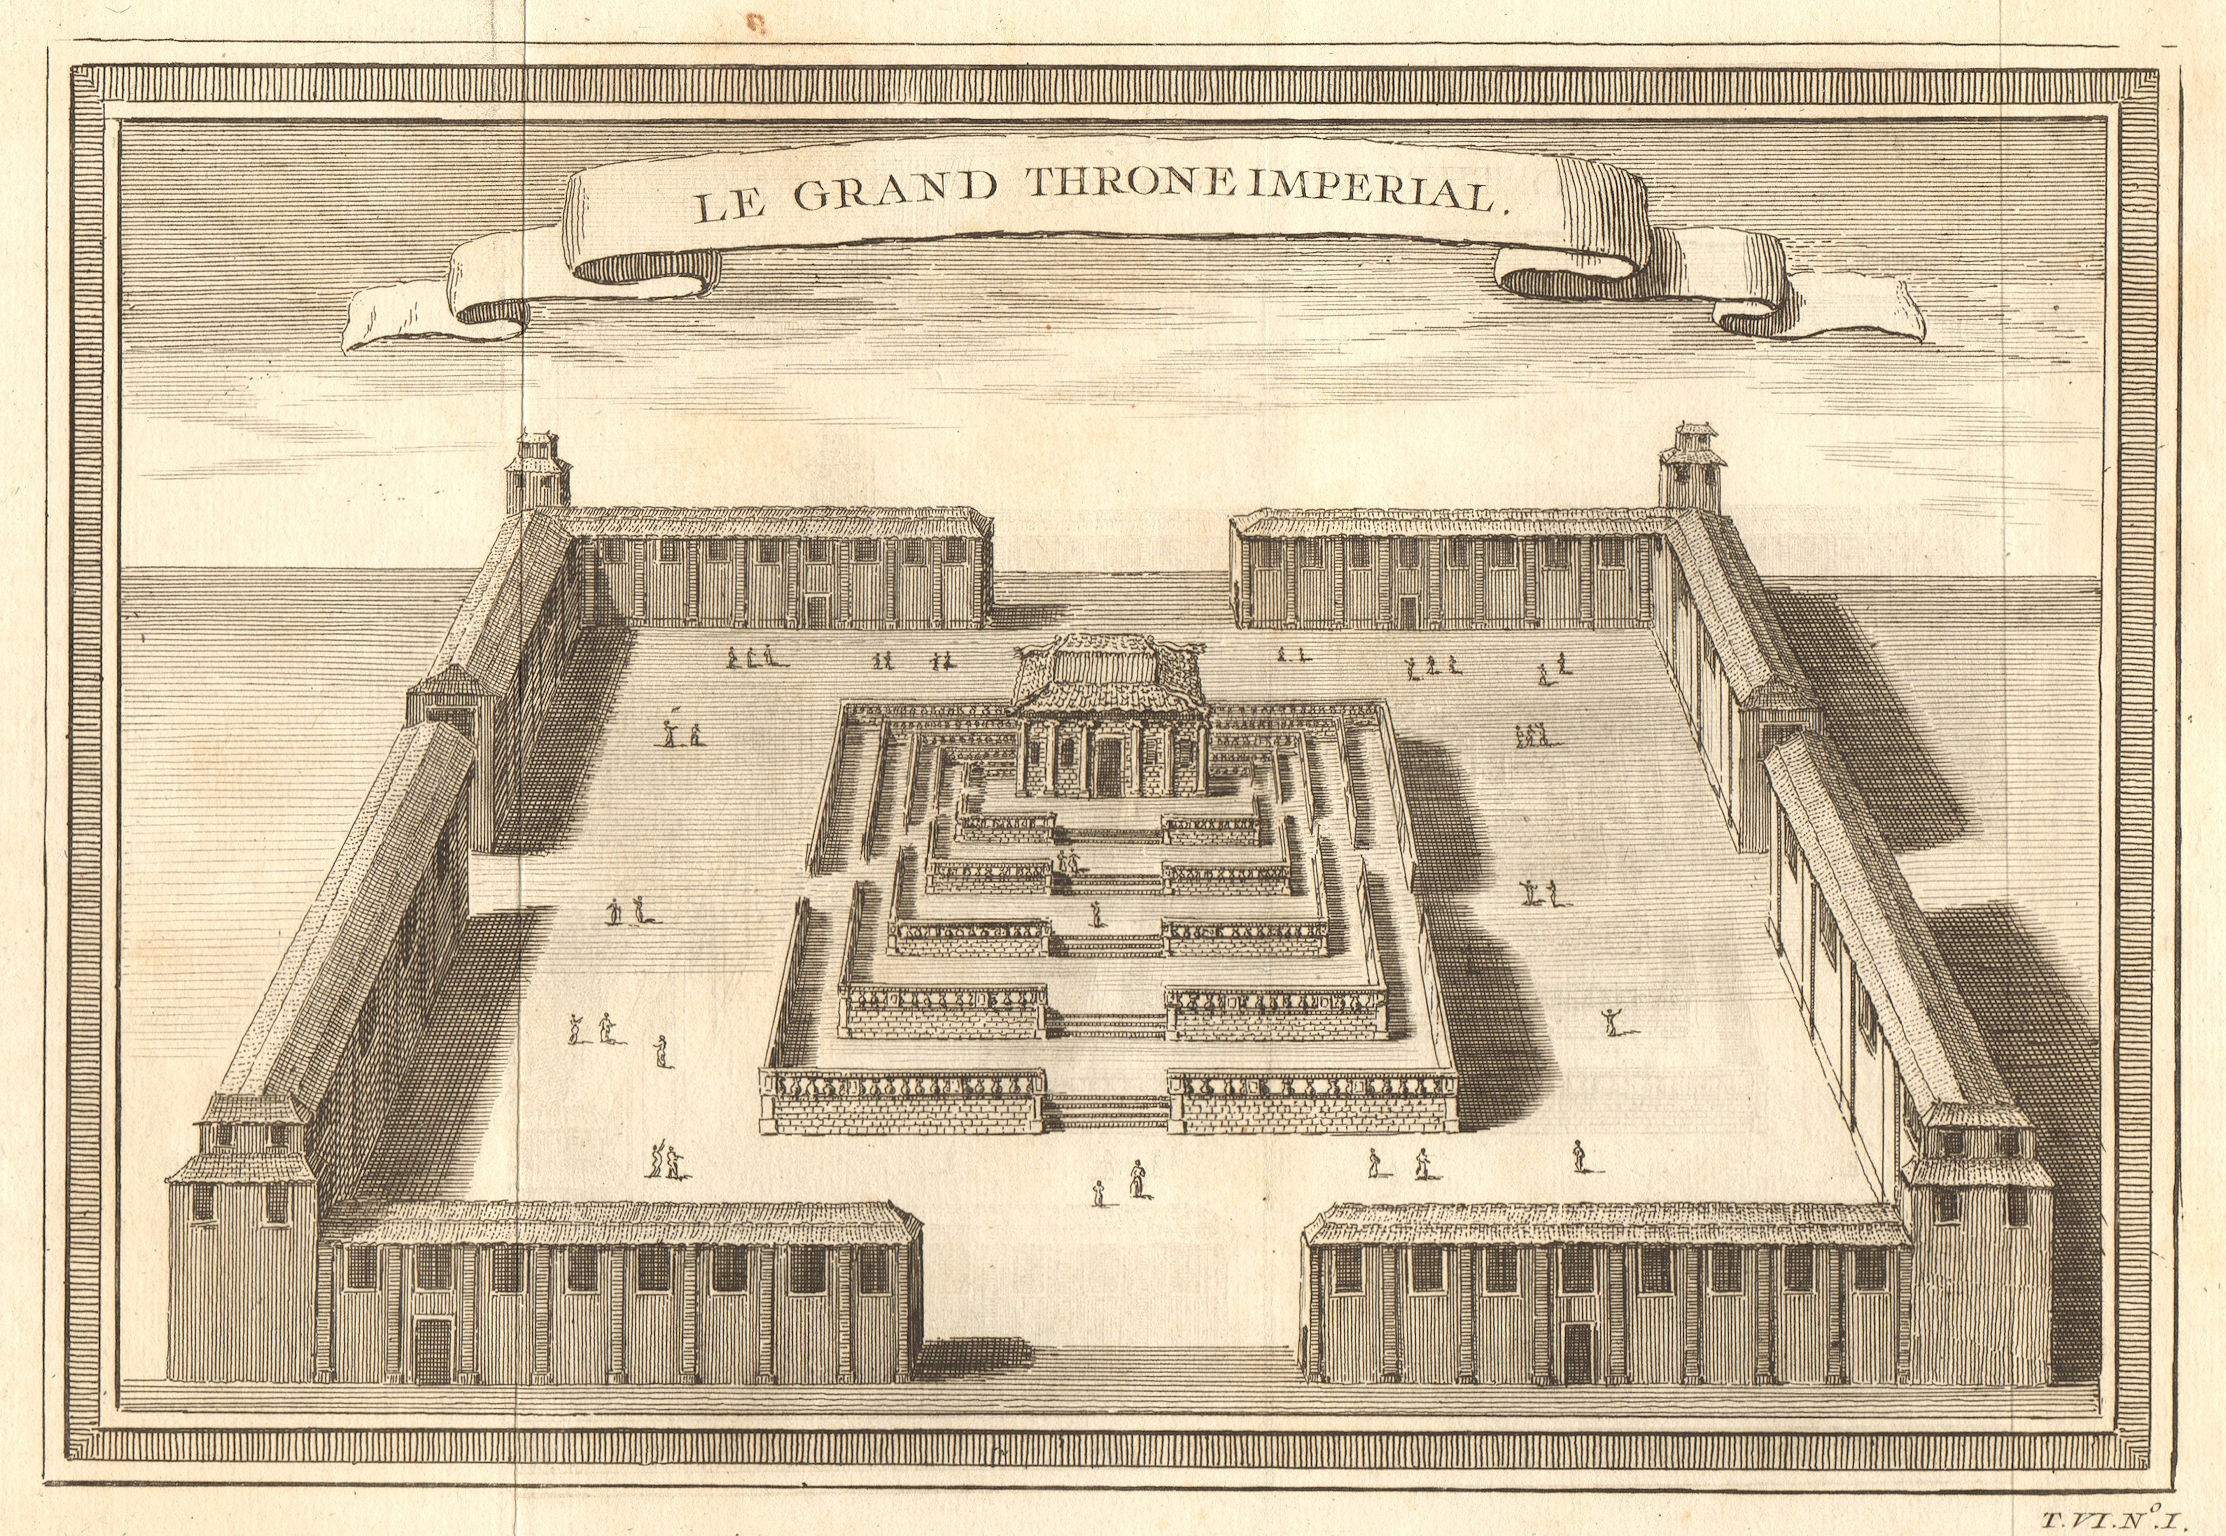 Associate Product 'Le Grand Throne Imperial'. The Forbidden City, Beijing, China 1748 old print